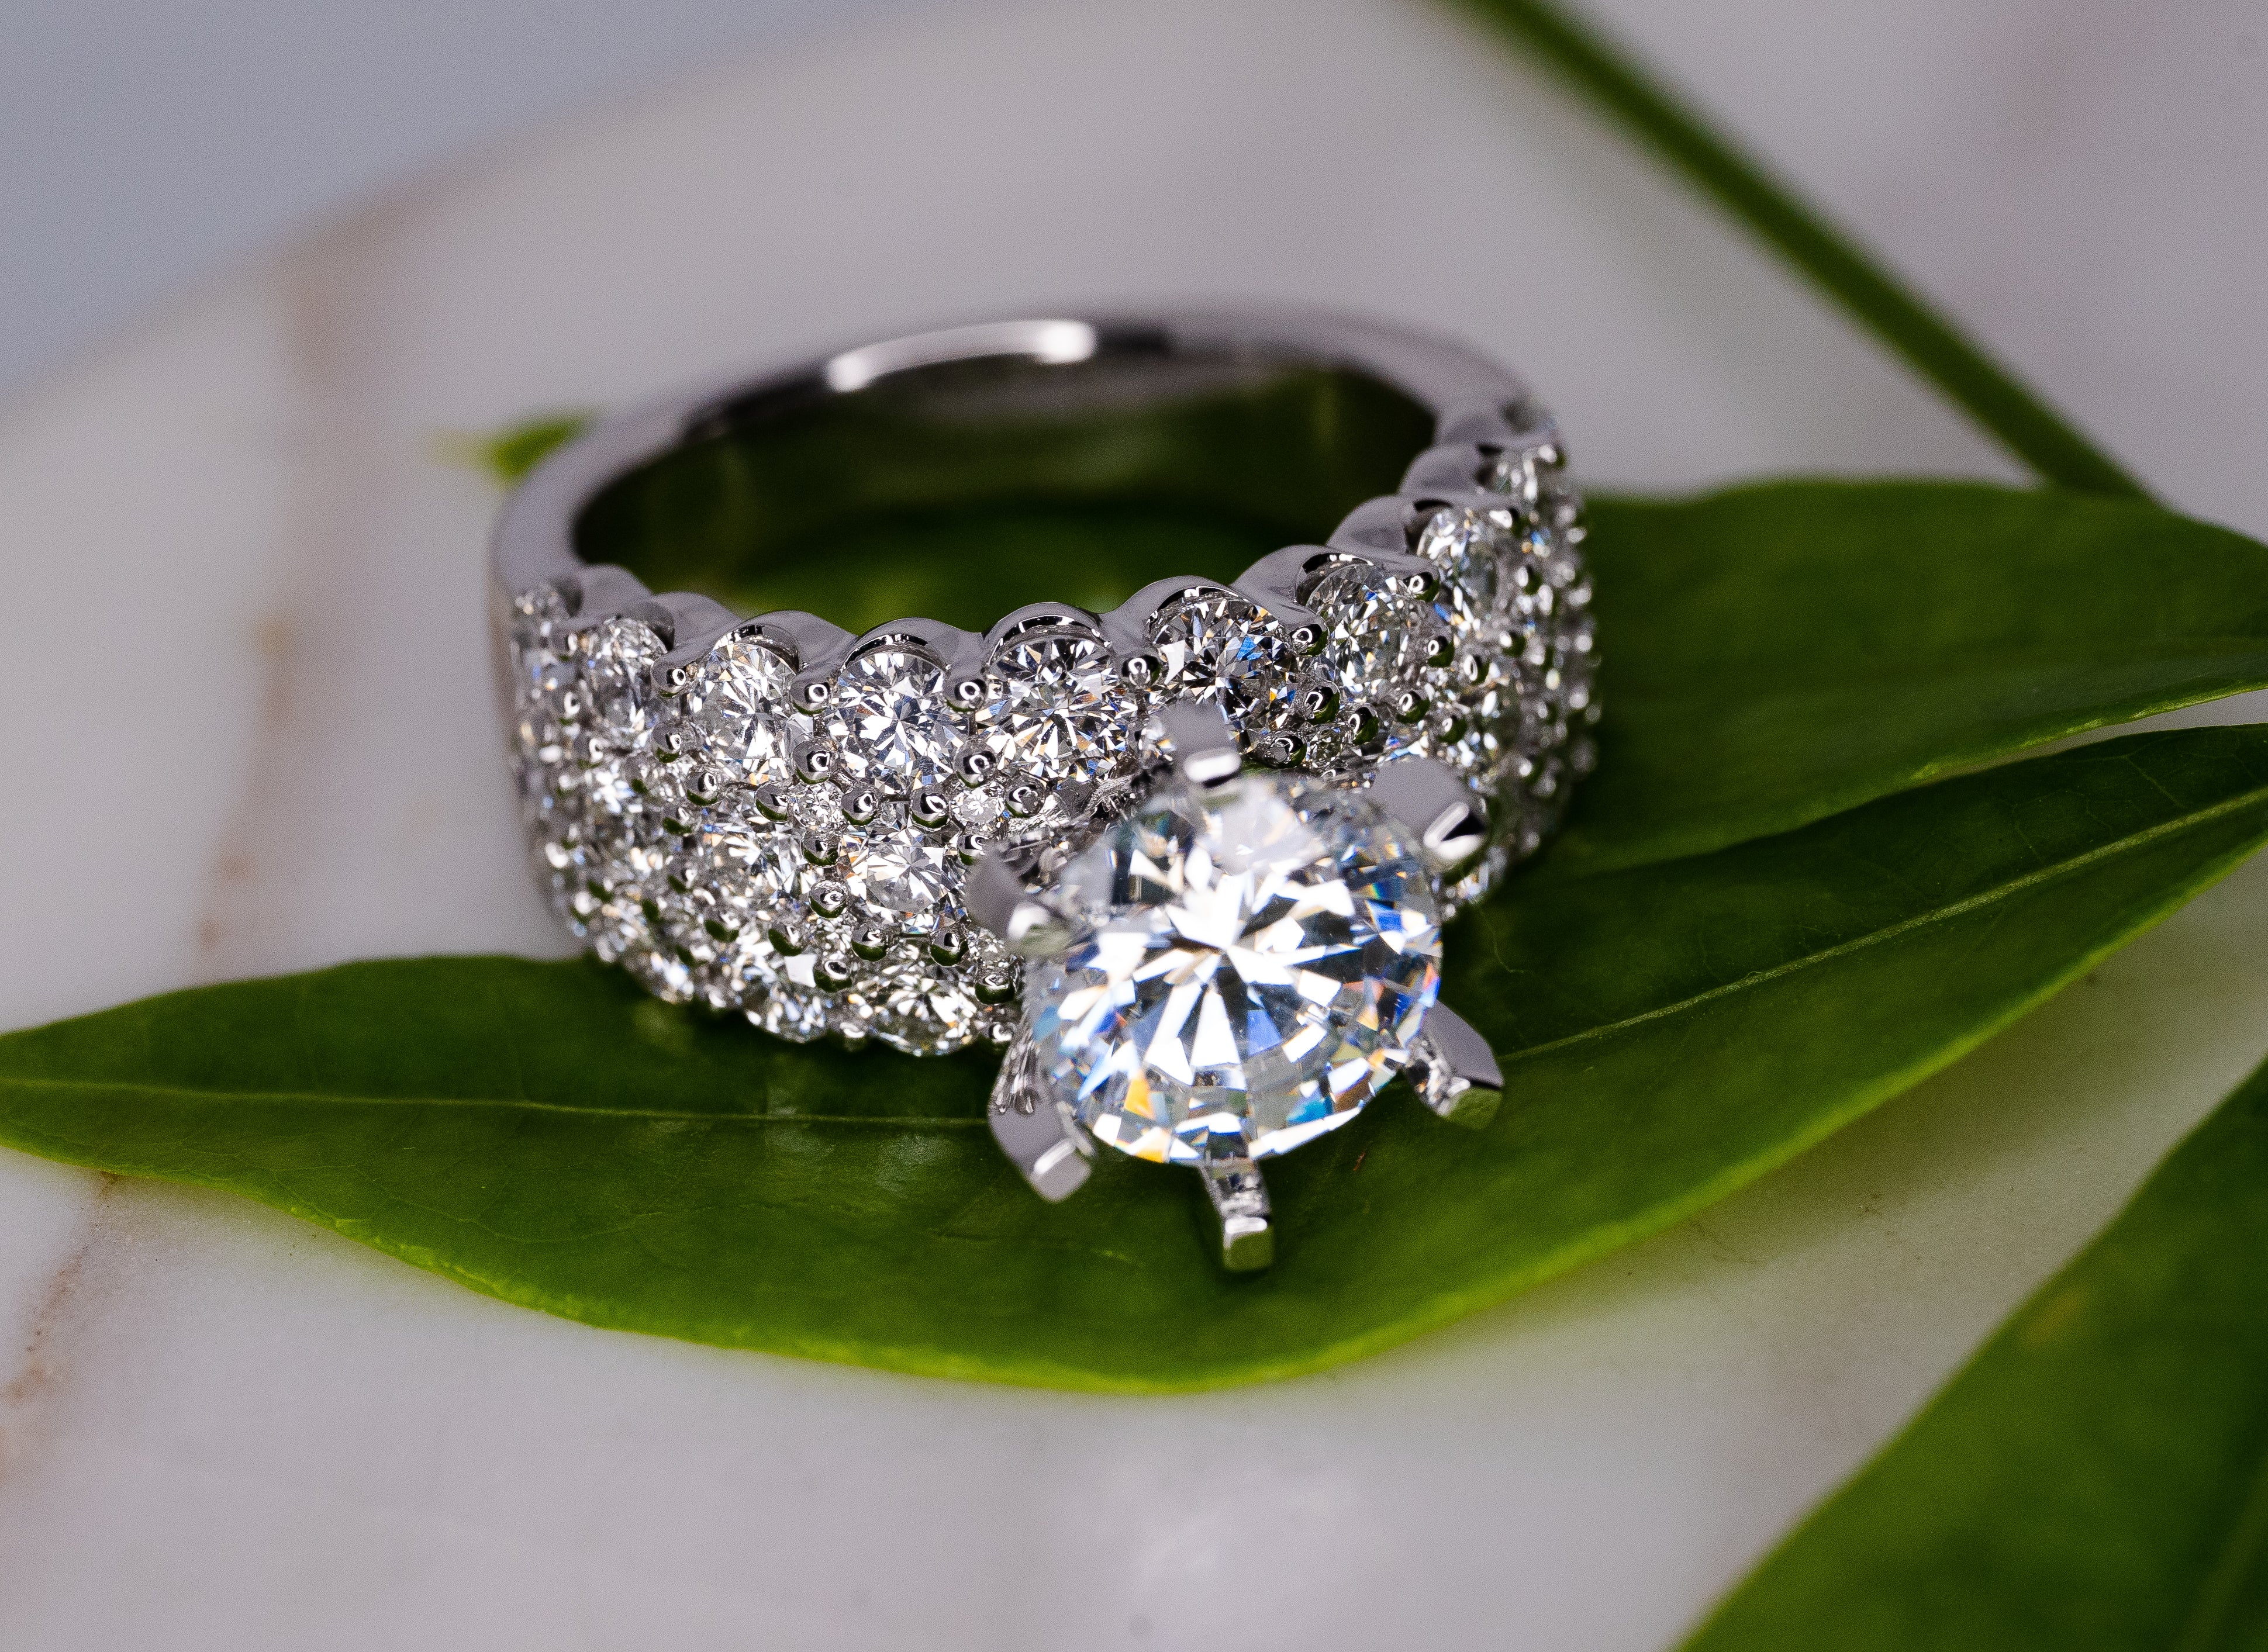 How to Finance Engagement Ring Designs by Verragio – Raymond Lee Jewelers